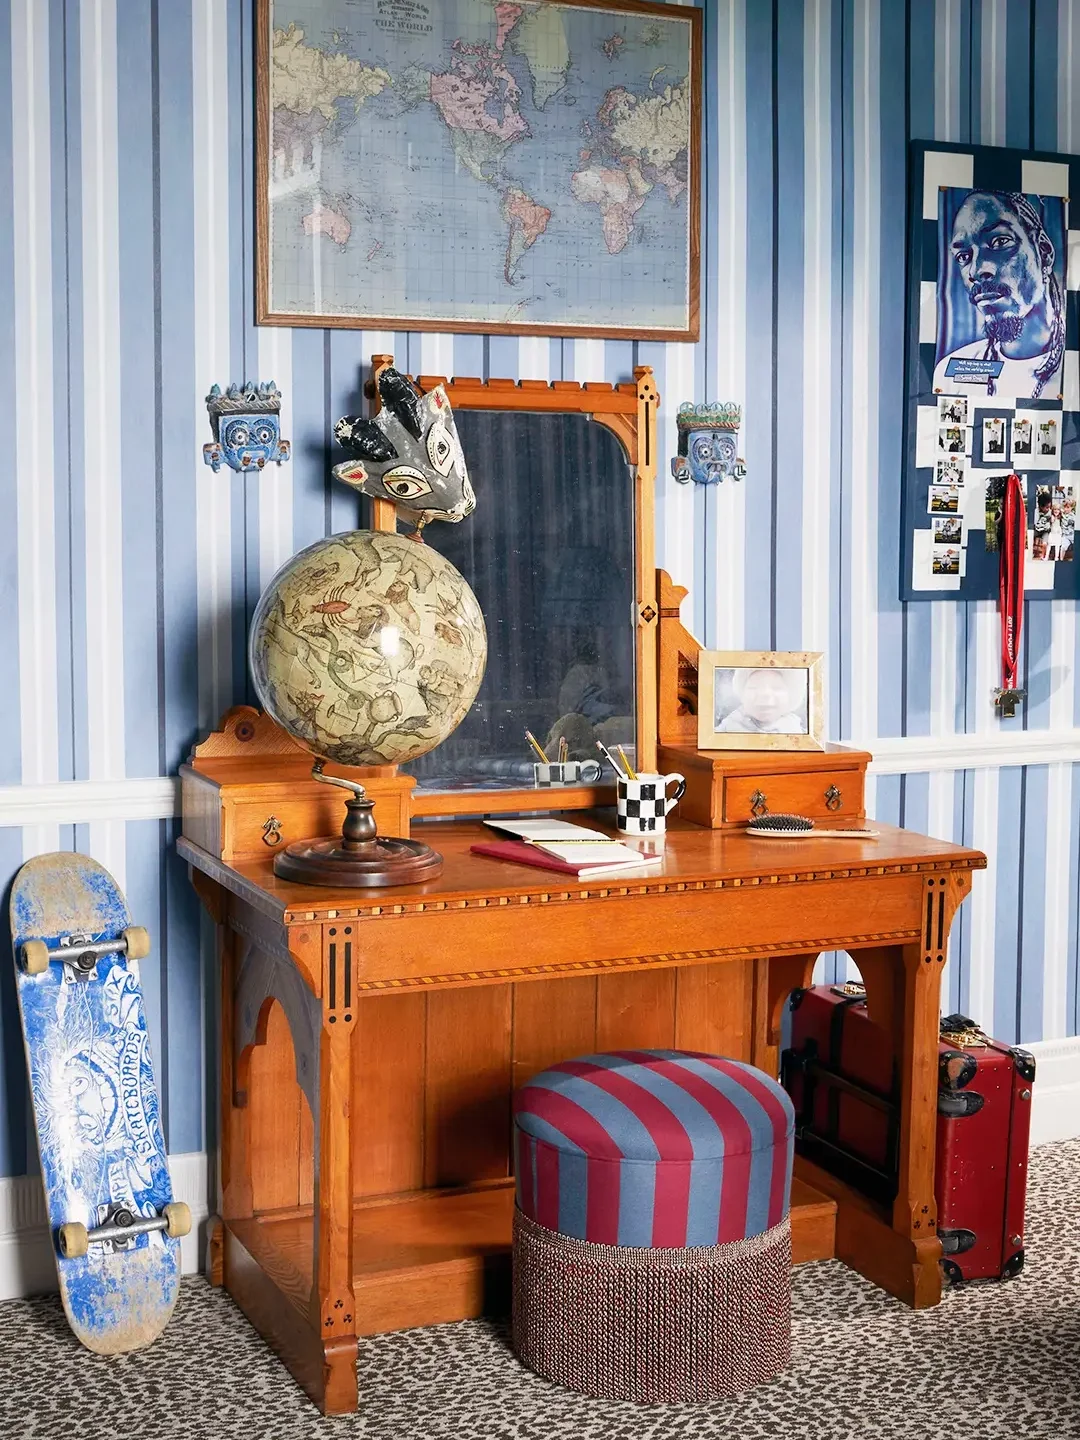 Teen bedroom with blue striped wallpaper and wood desk with striped blue and burgundy stool.